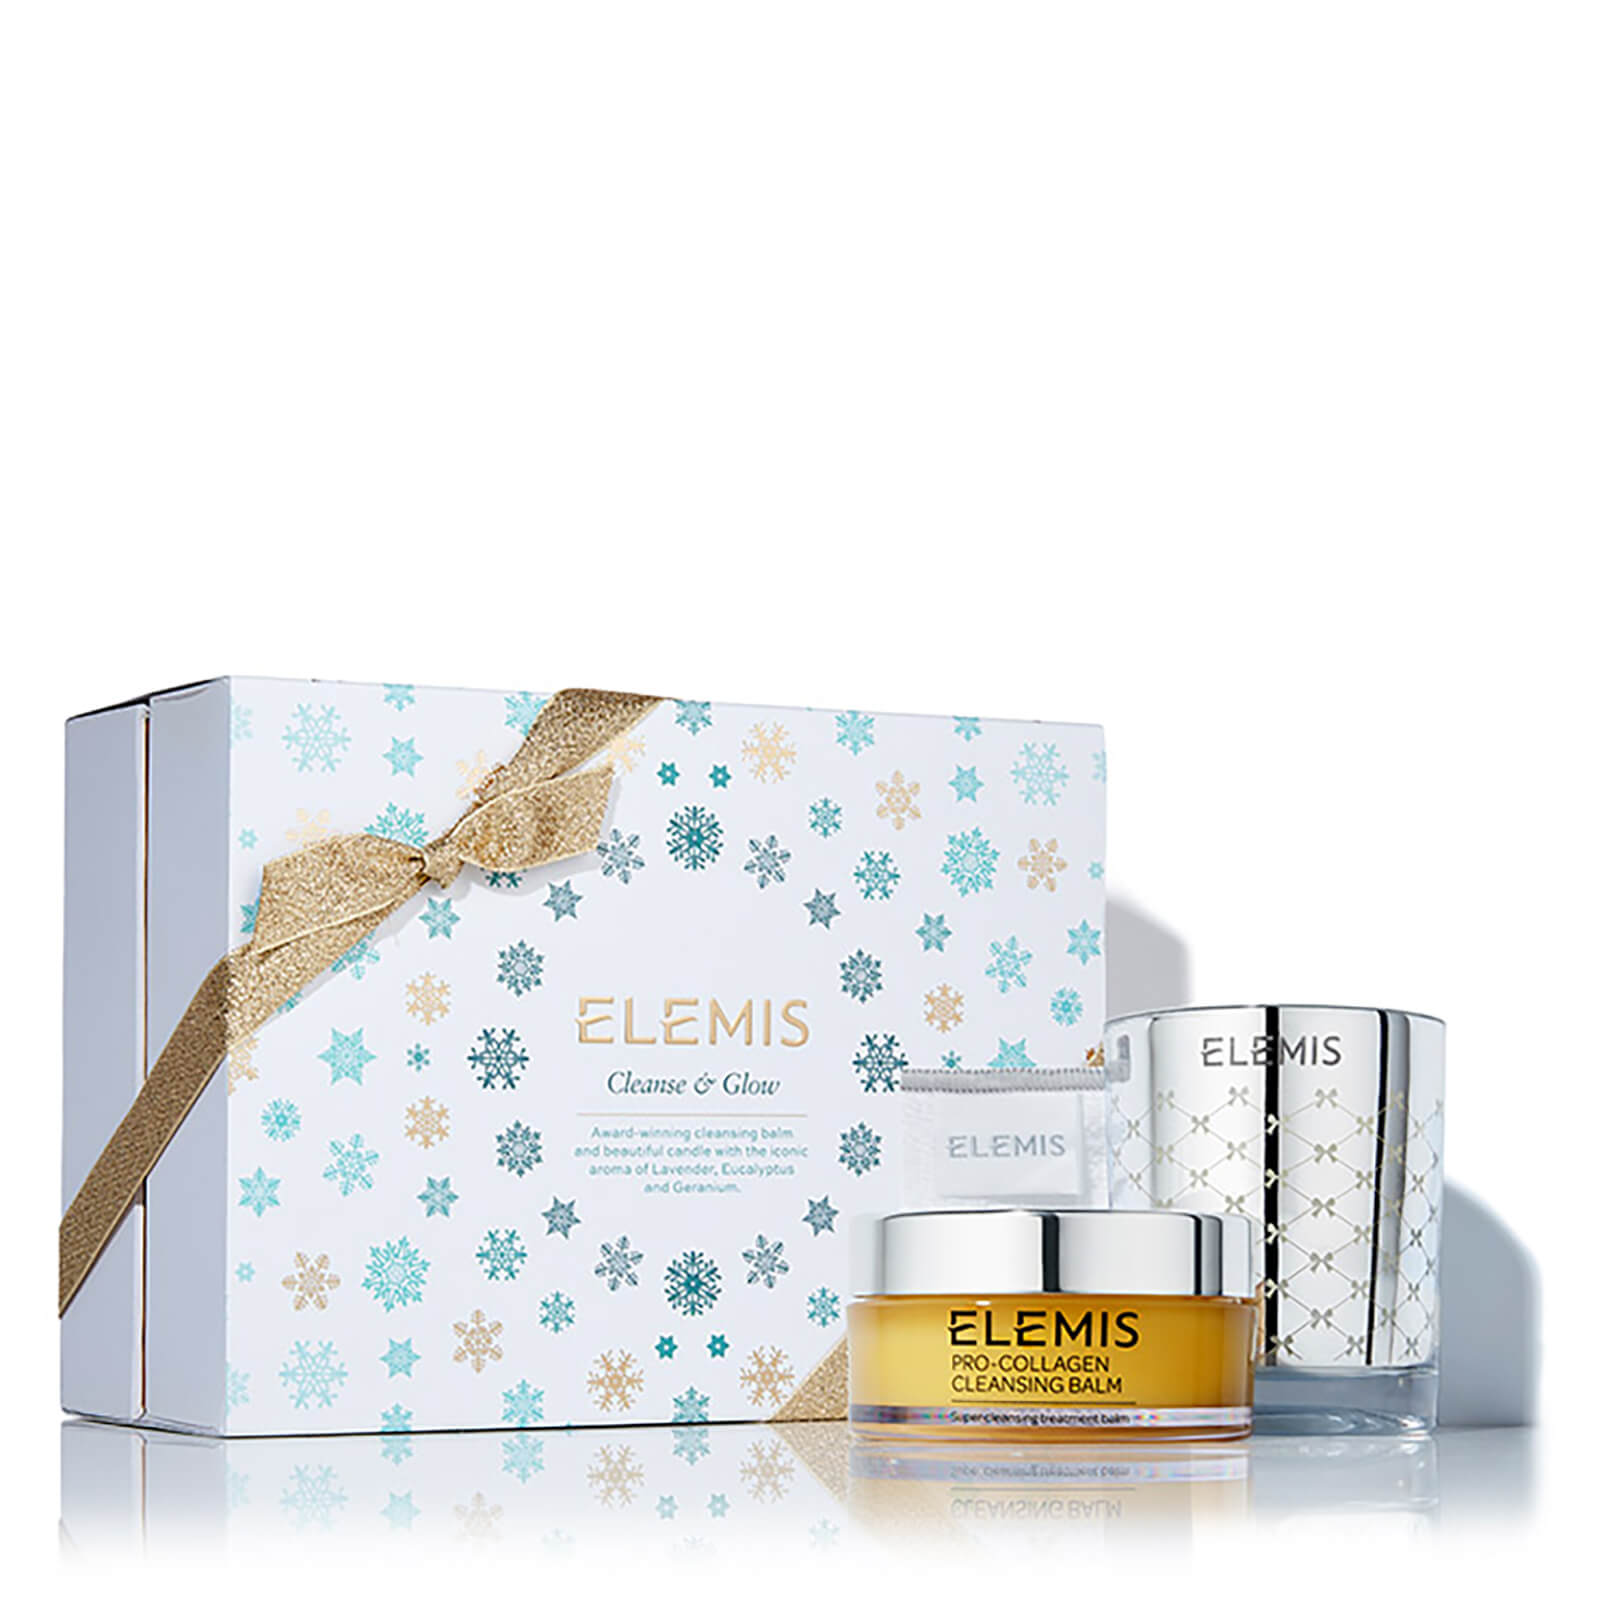 Elemis Cleanse and Glow Gift Set